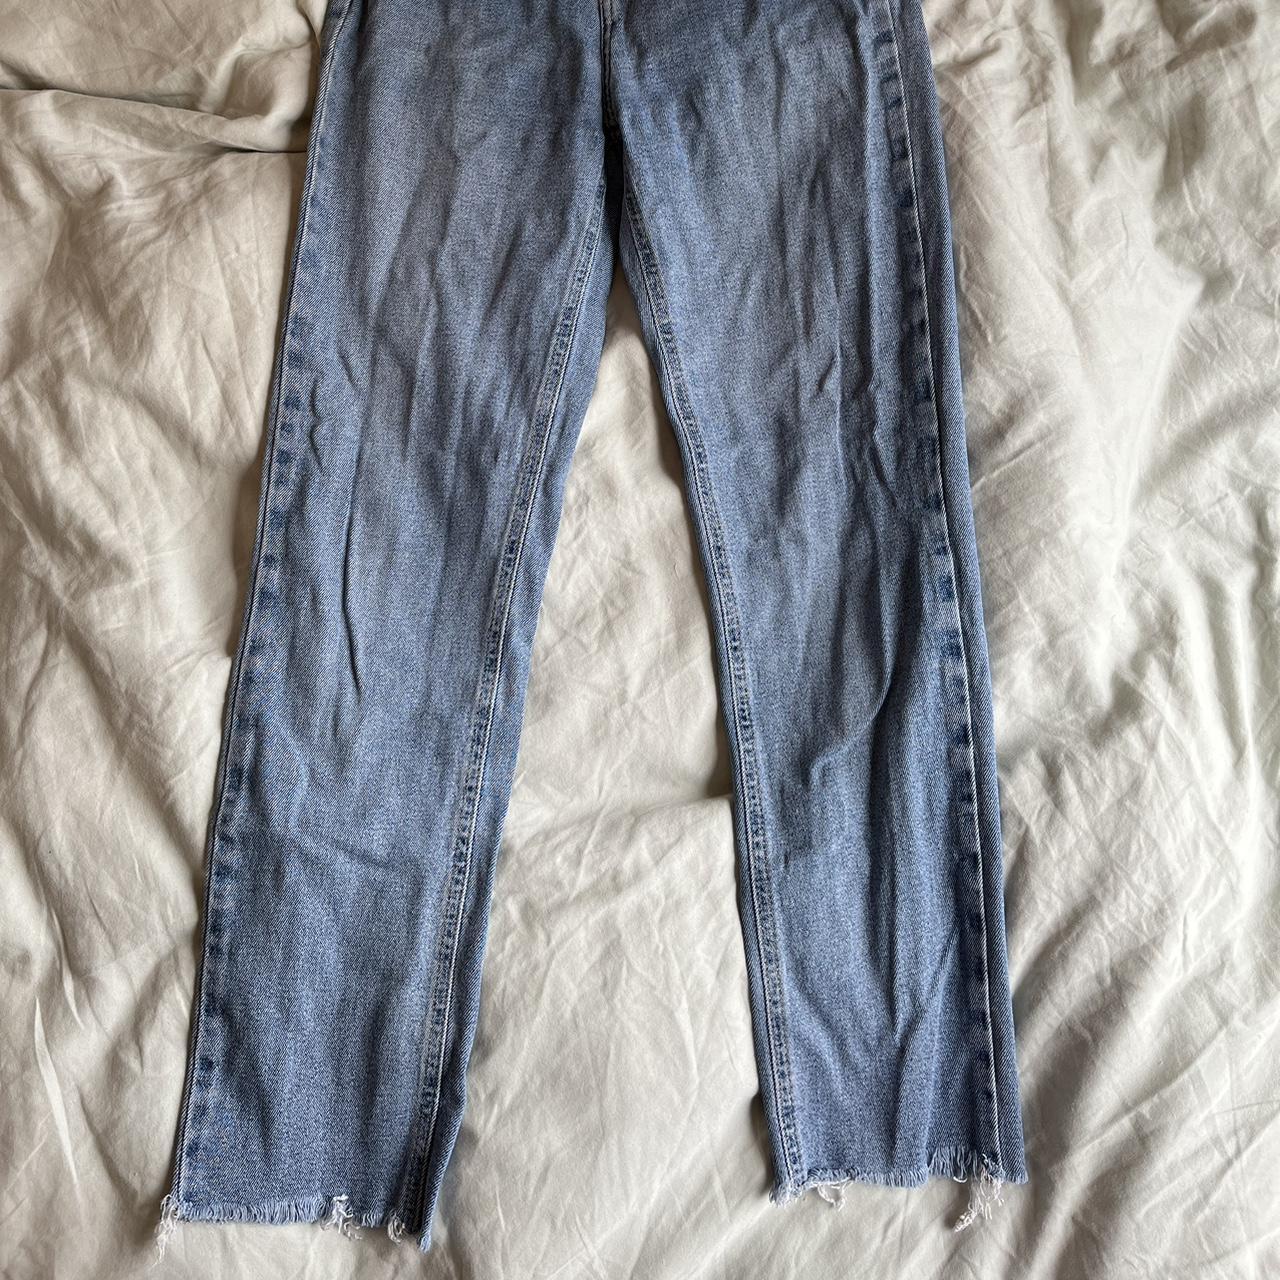 Urban Outfitters Women's Blue Jeans (5)